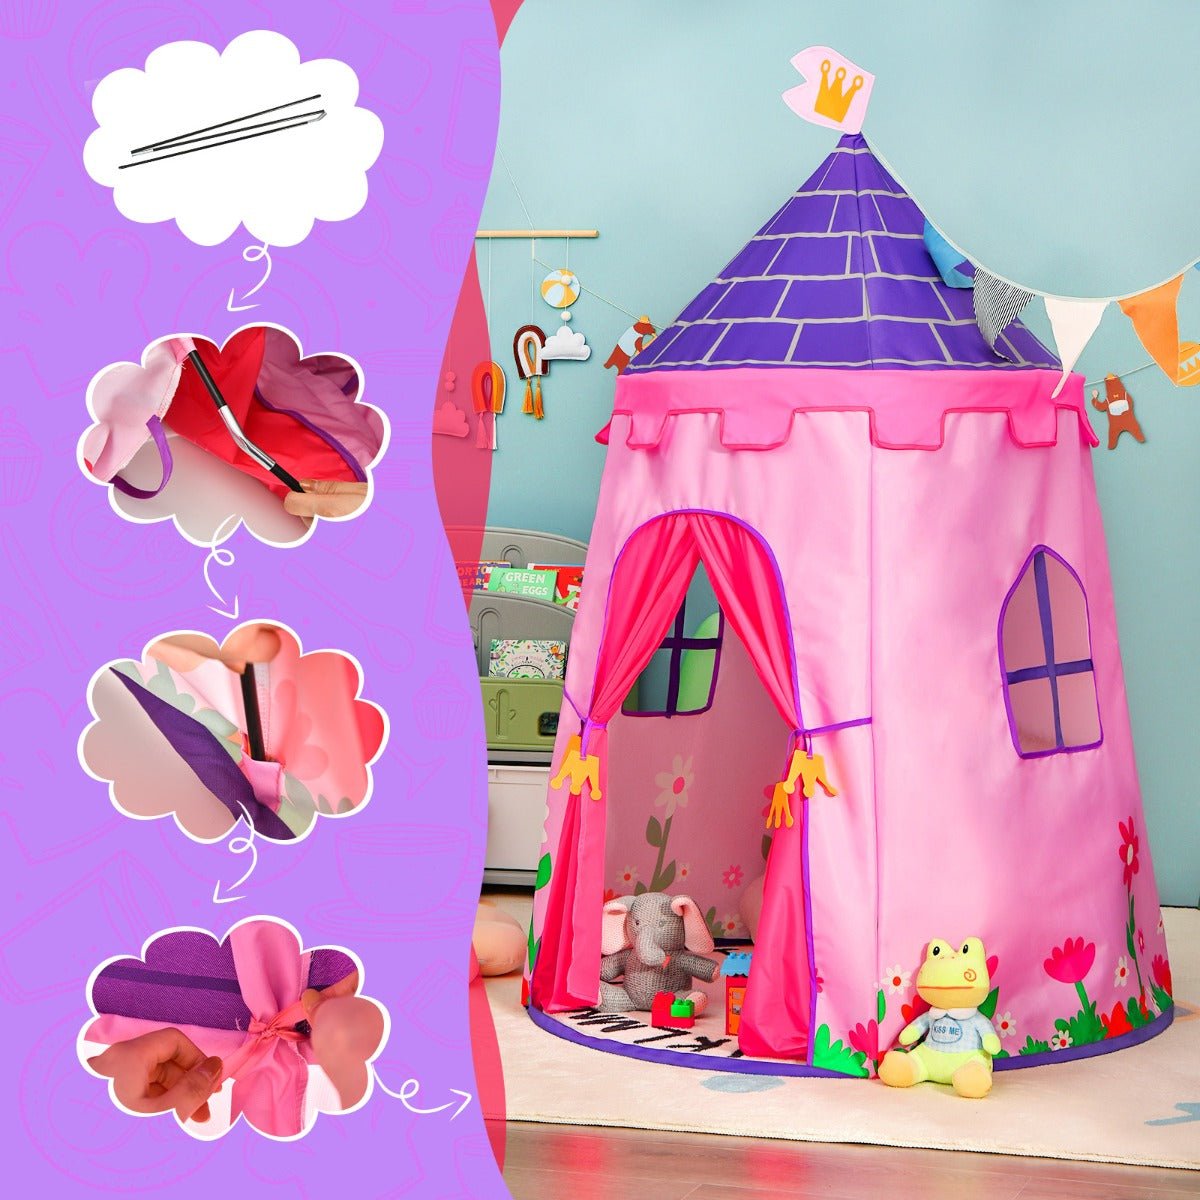 Explore and Play: Portable Kids Castle Playhouse with Carry Bag